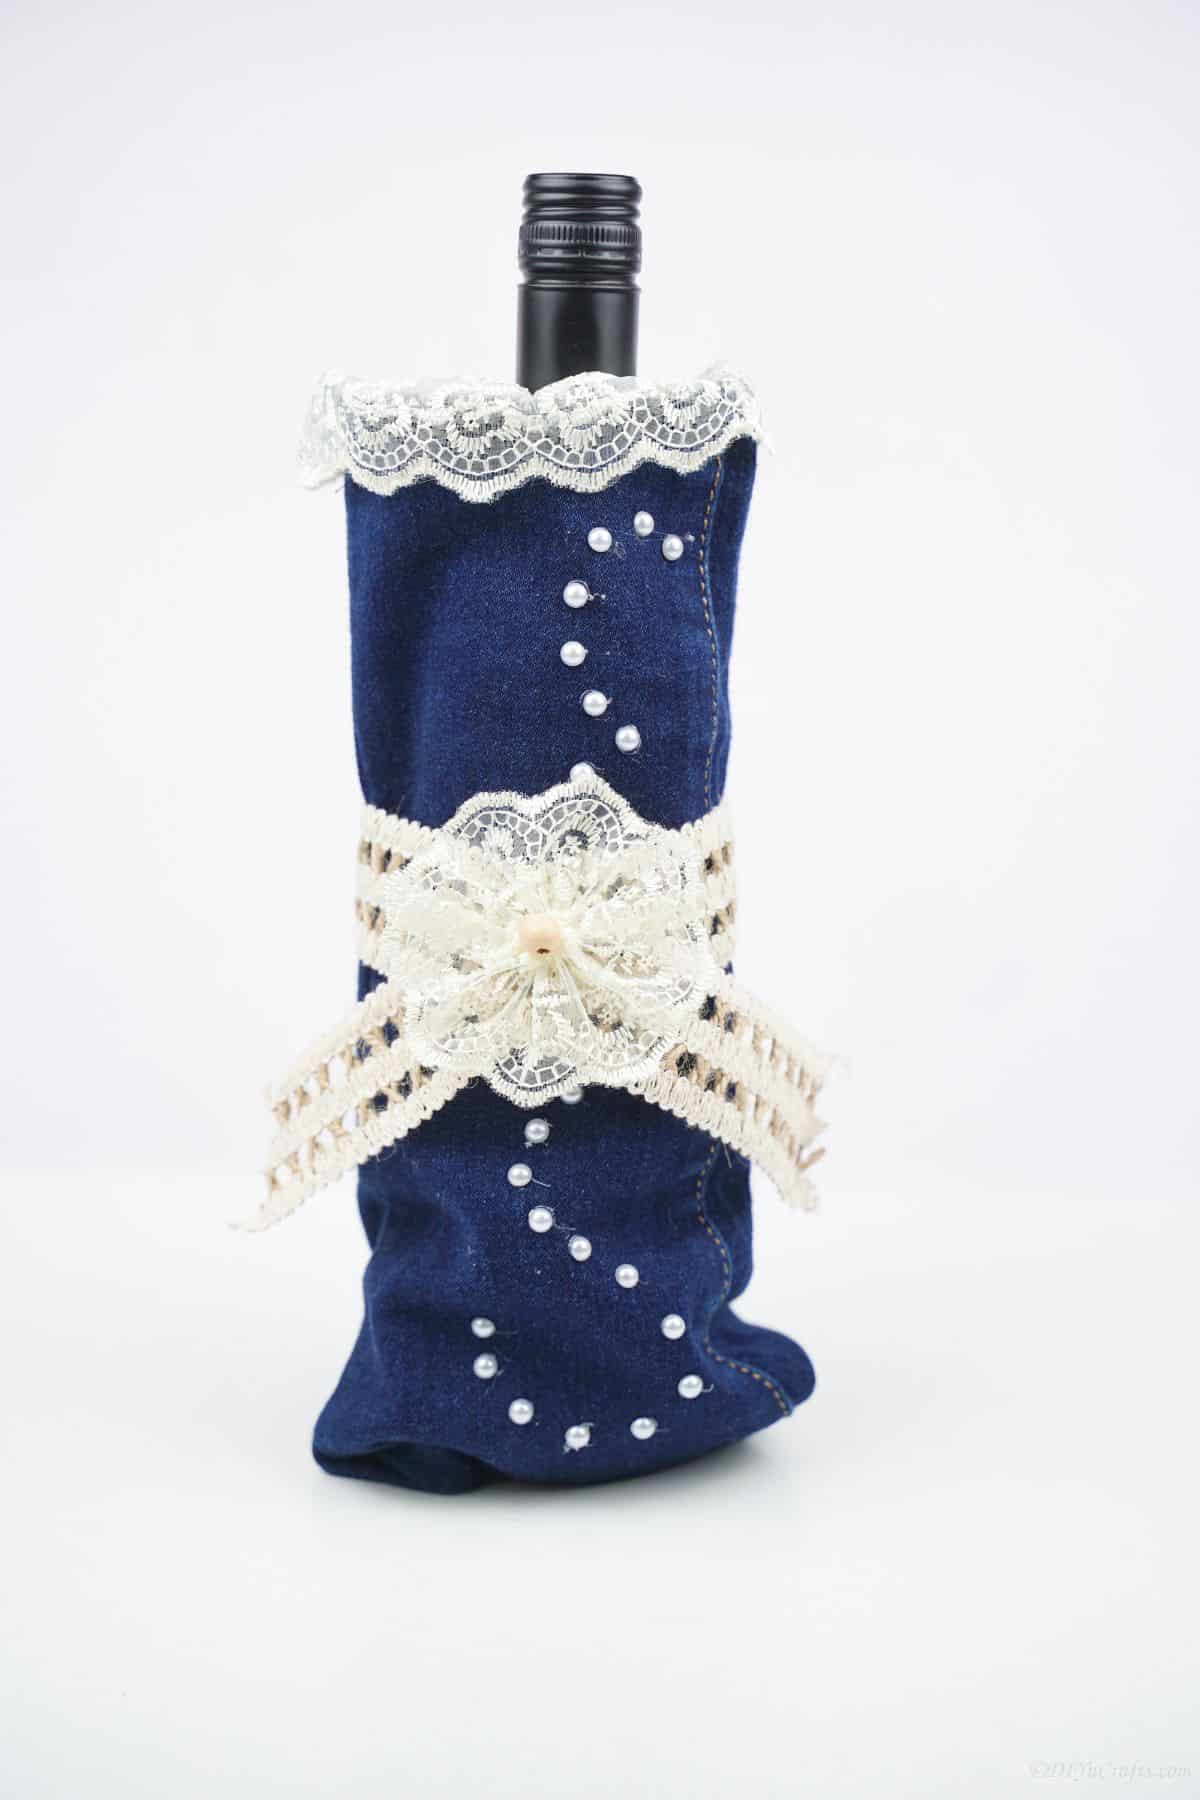 denim and lace wine bottle cover against white wall